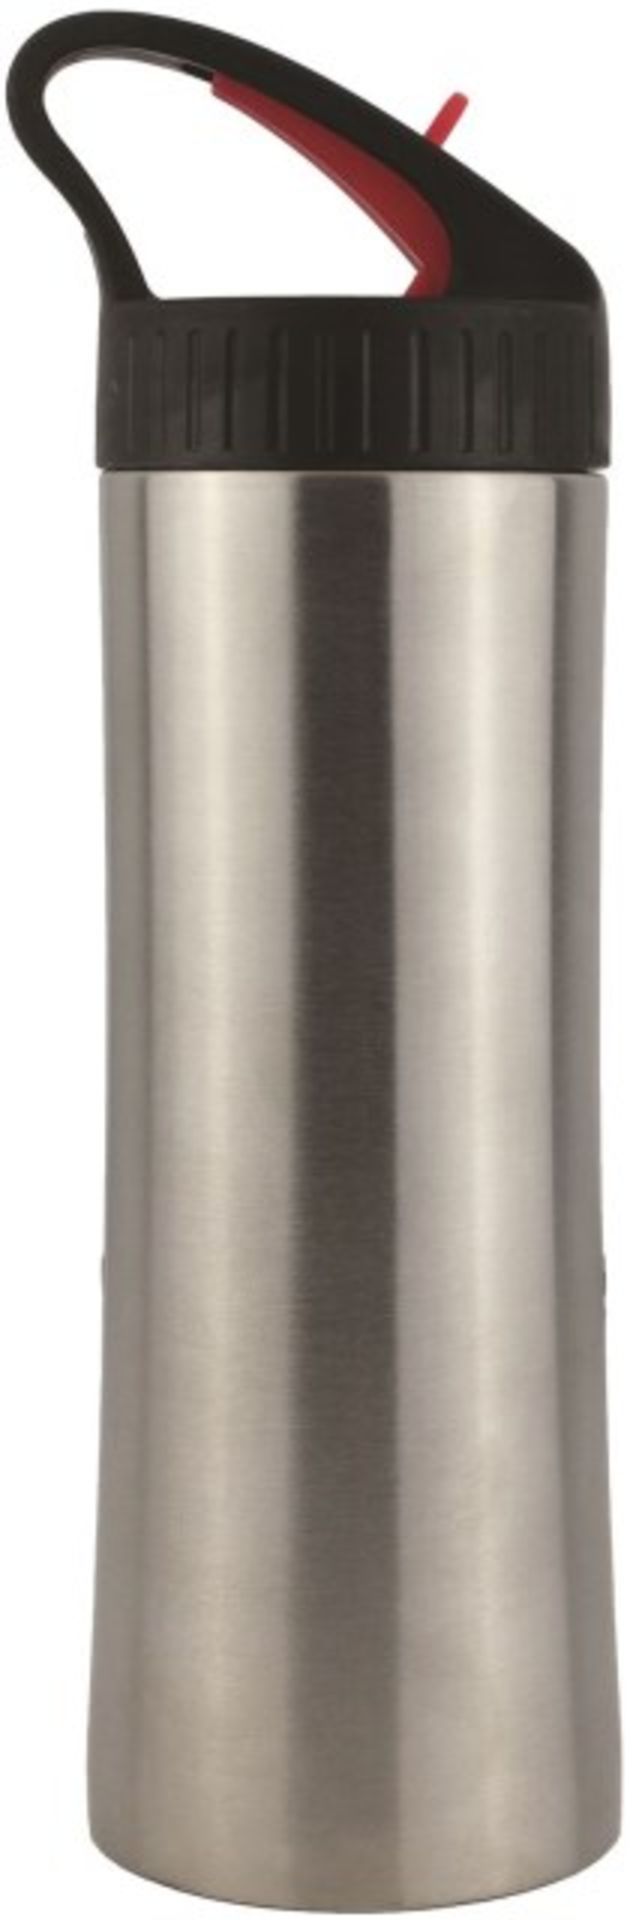 V Grade A Aluminium Drinks Flask X 2 YOUR BID PRICE TO BE MULTIPLIED BY TWO